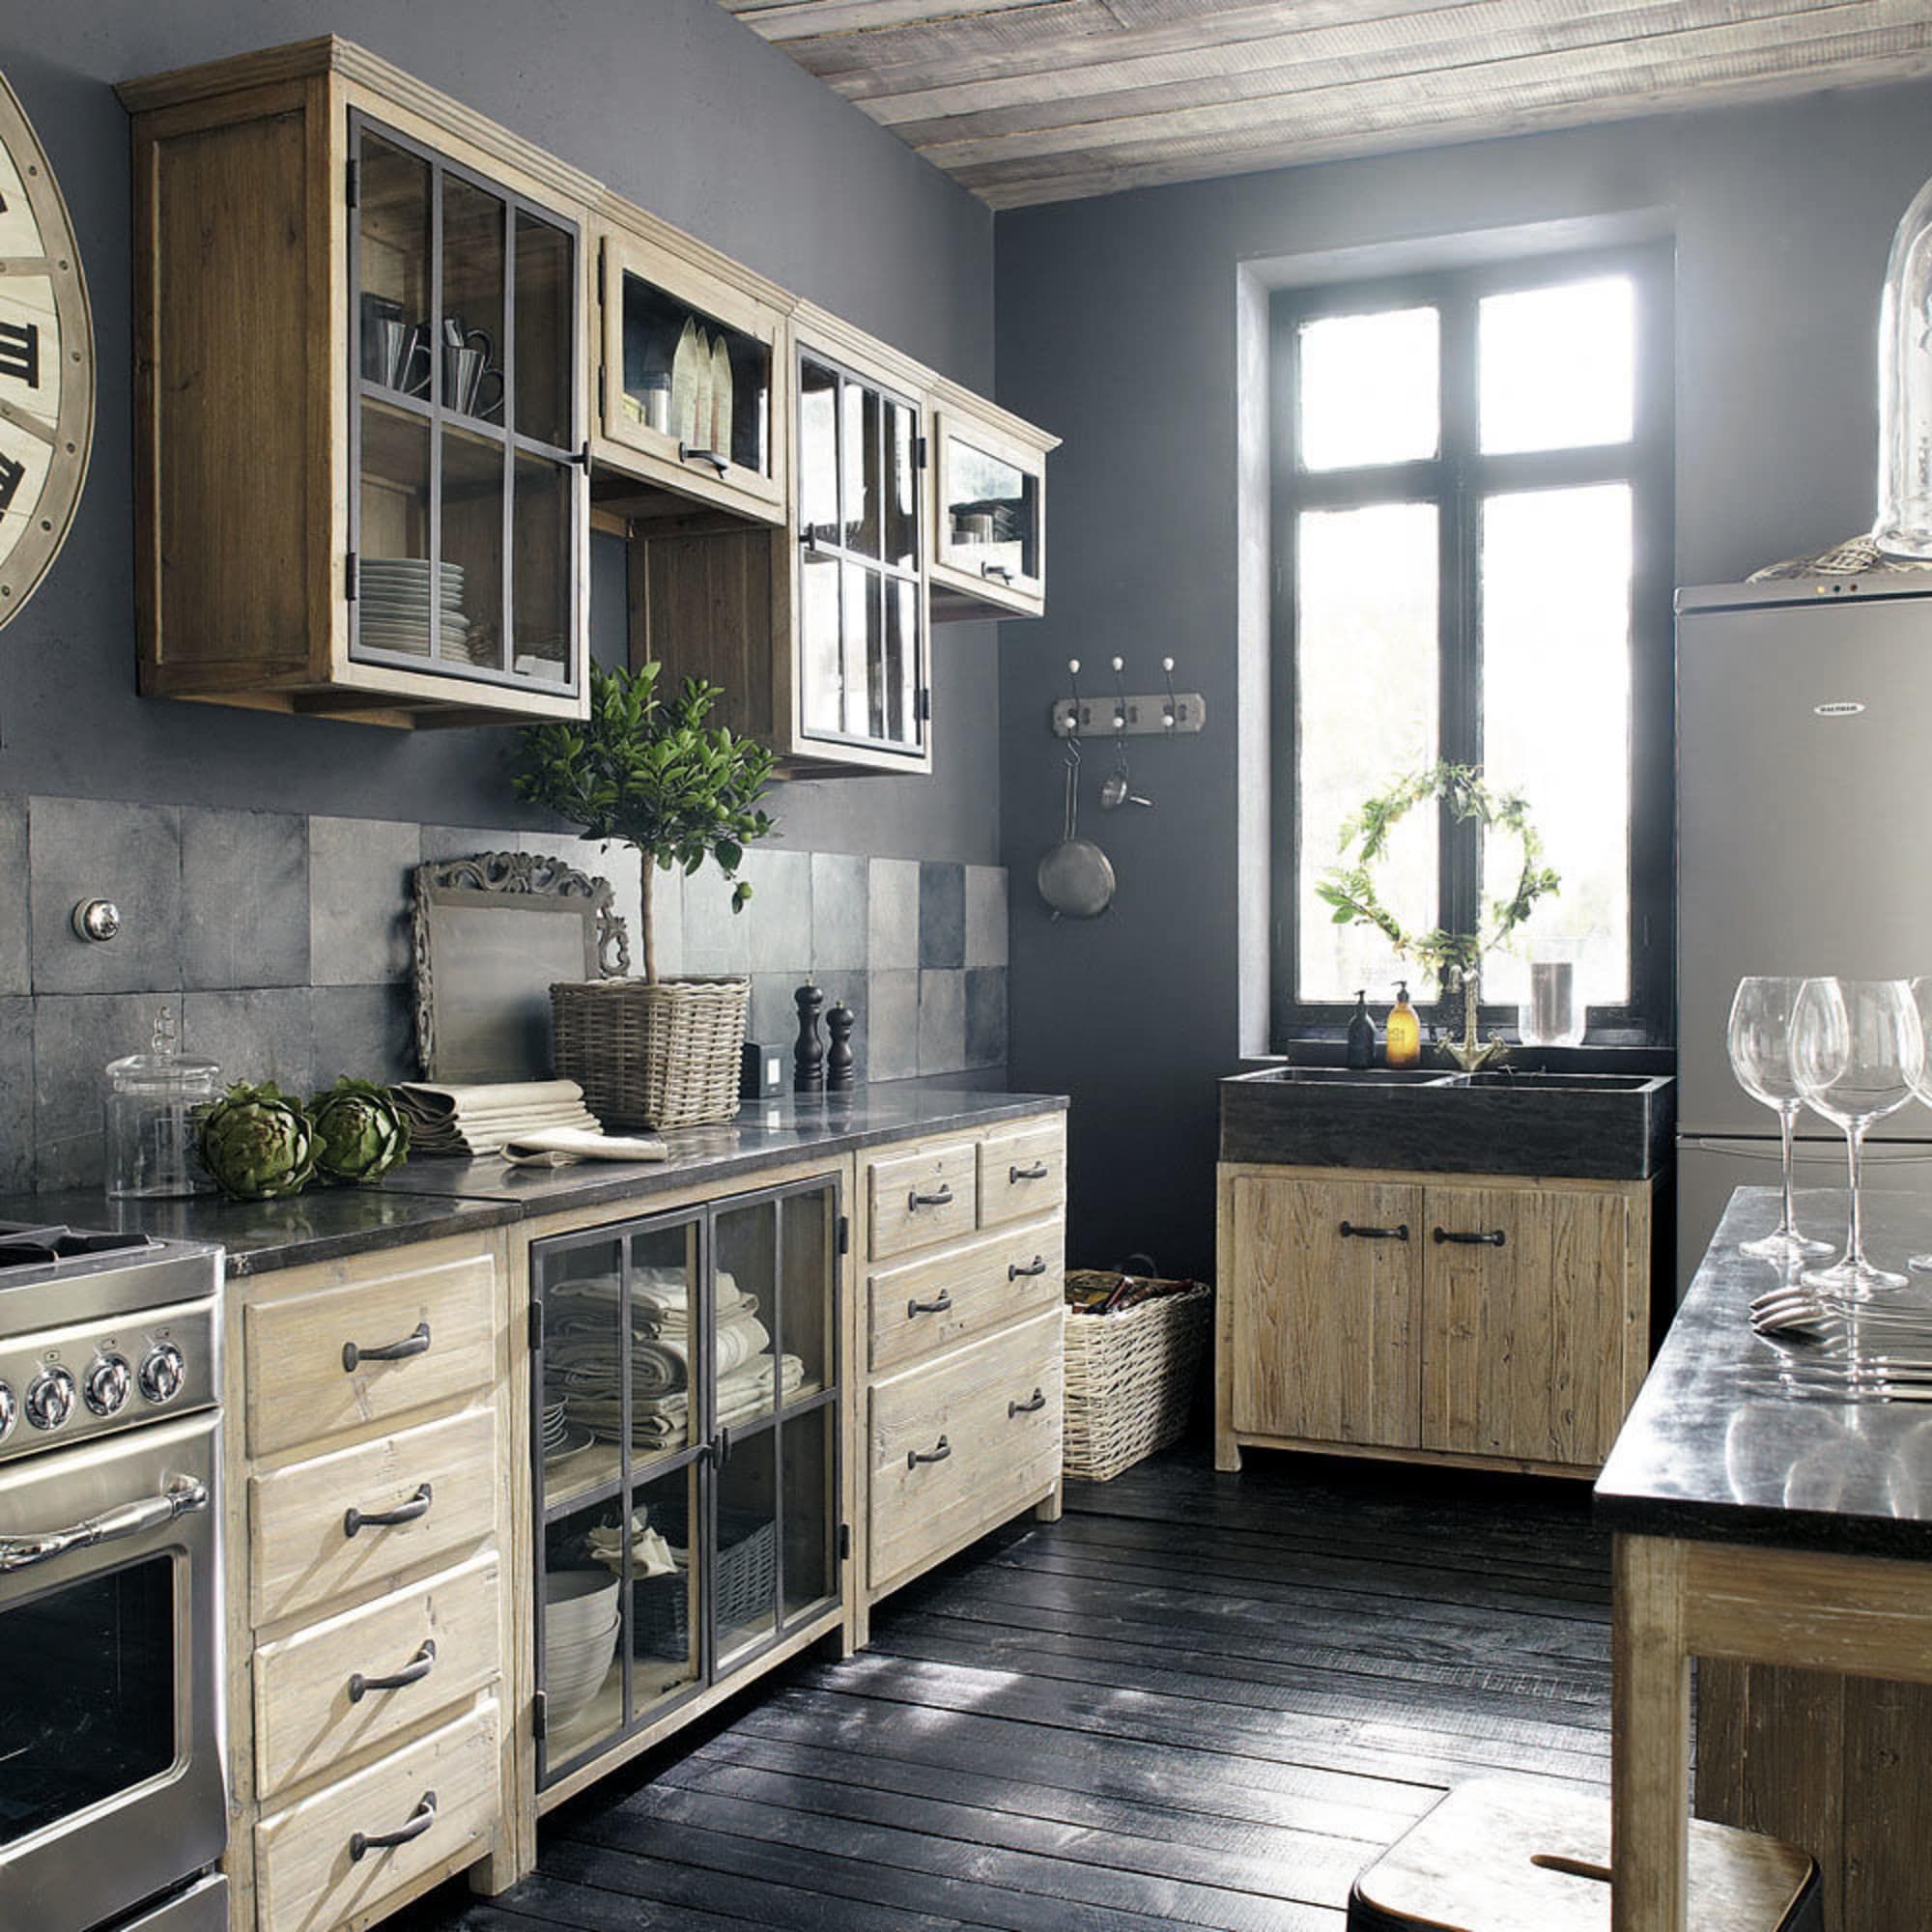 Paint your kitchen gray